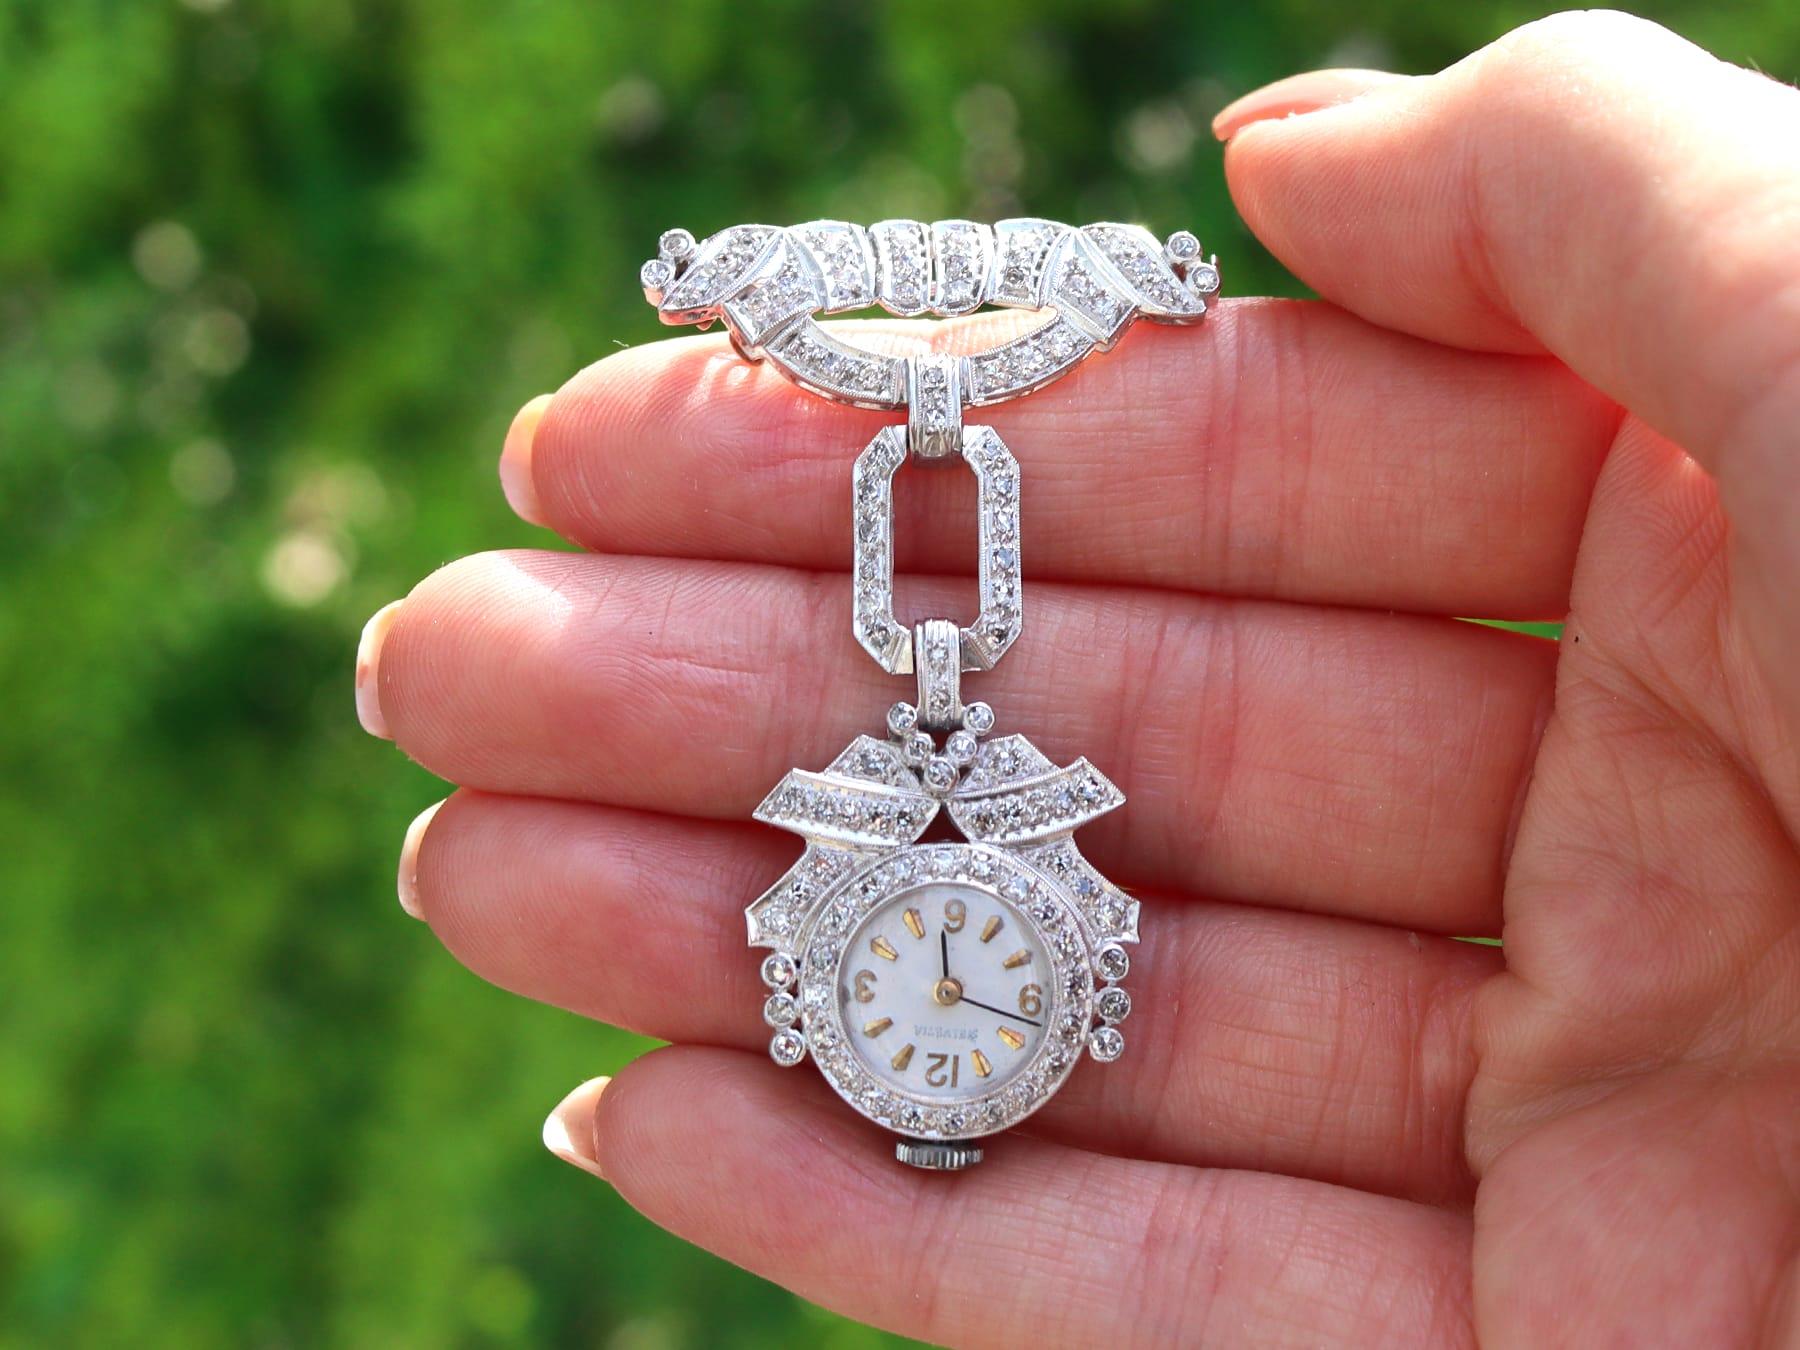 An impressive vintage Art Deco 1.50 carat diamond and platinum cocktail fob watch by 'Helvetia'; part of our diverse diamond jewelry and estate jewelry collections.

This fine and impressive diamond Art Deco fob watch has been crafted in